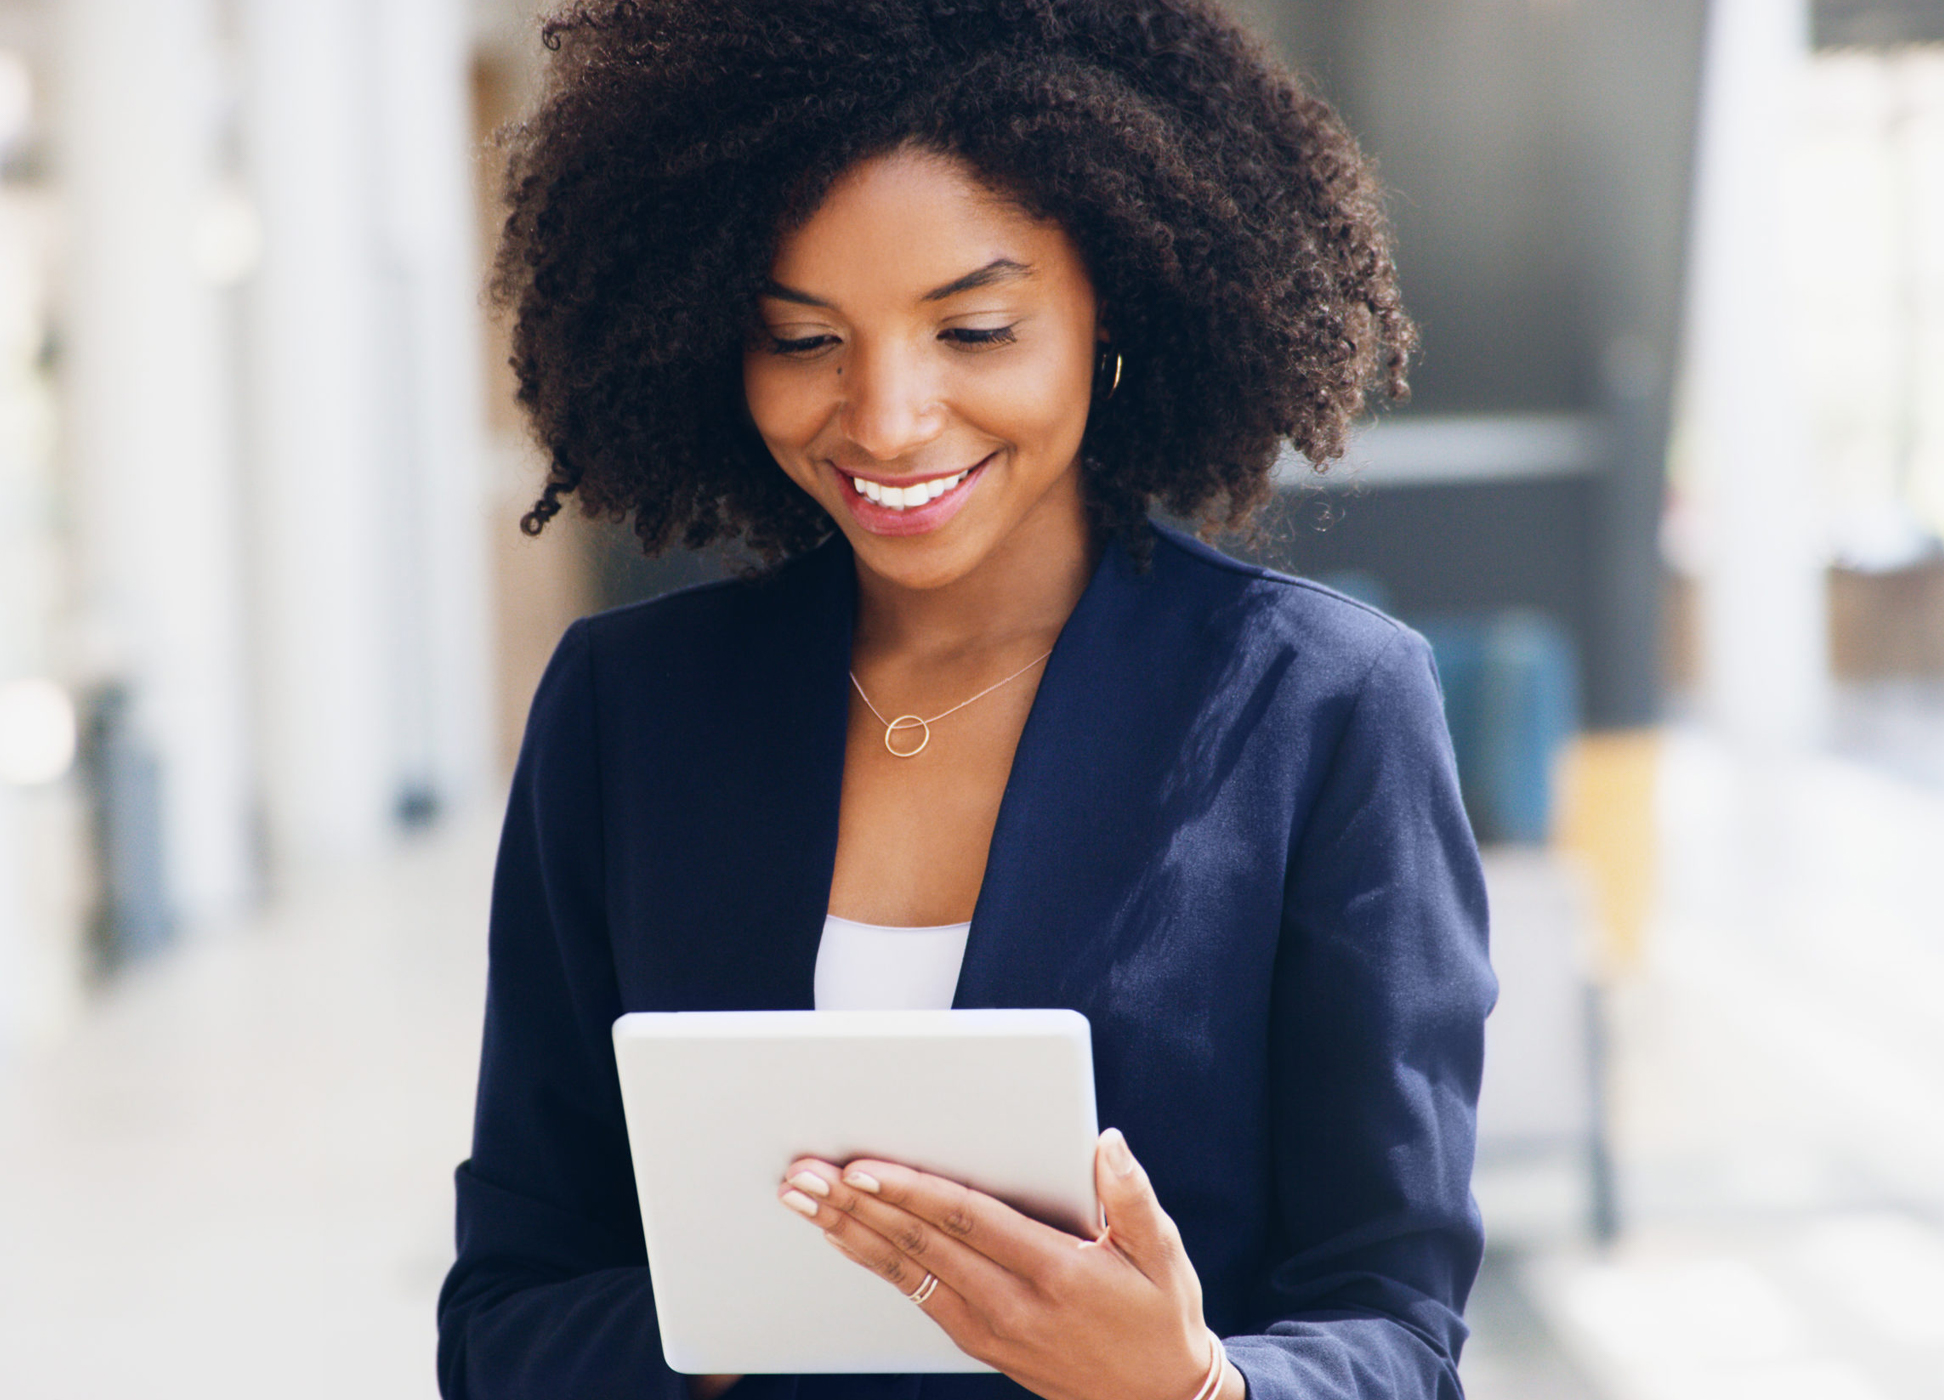 Cropped shot of an attractive young businesswoman standing alone and using a tablet while in the office during the day